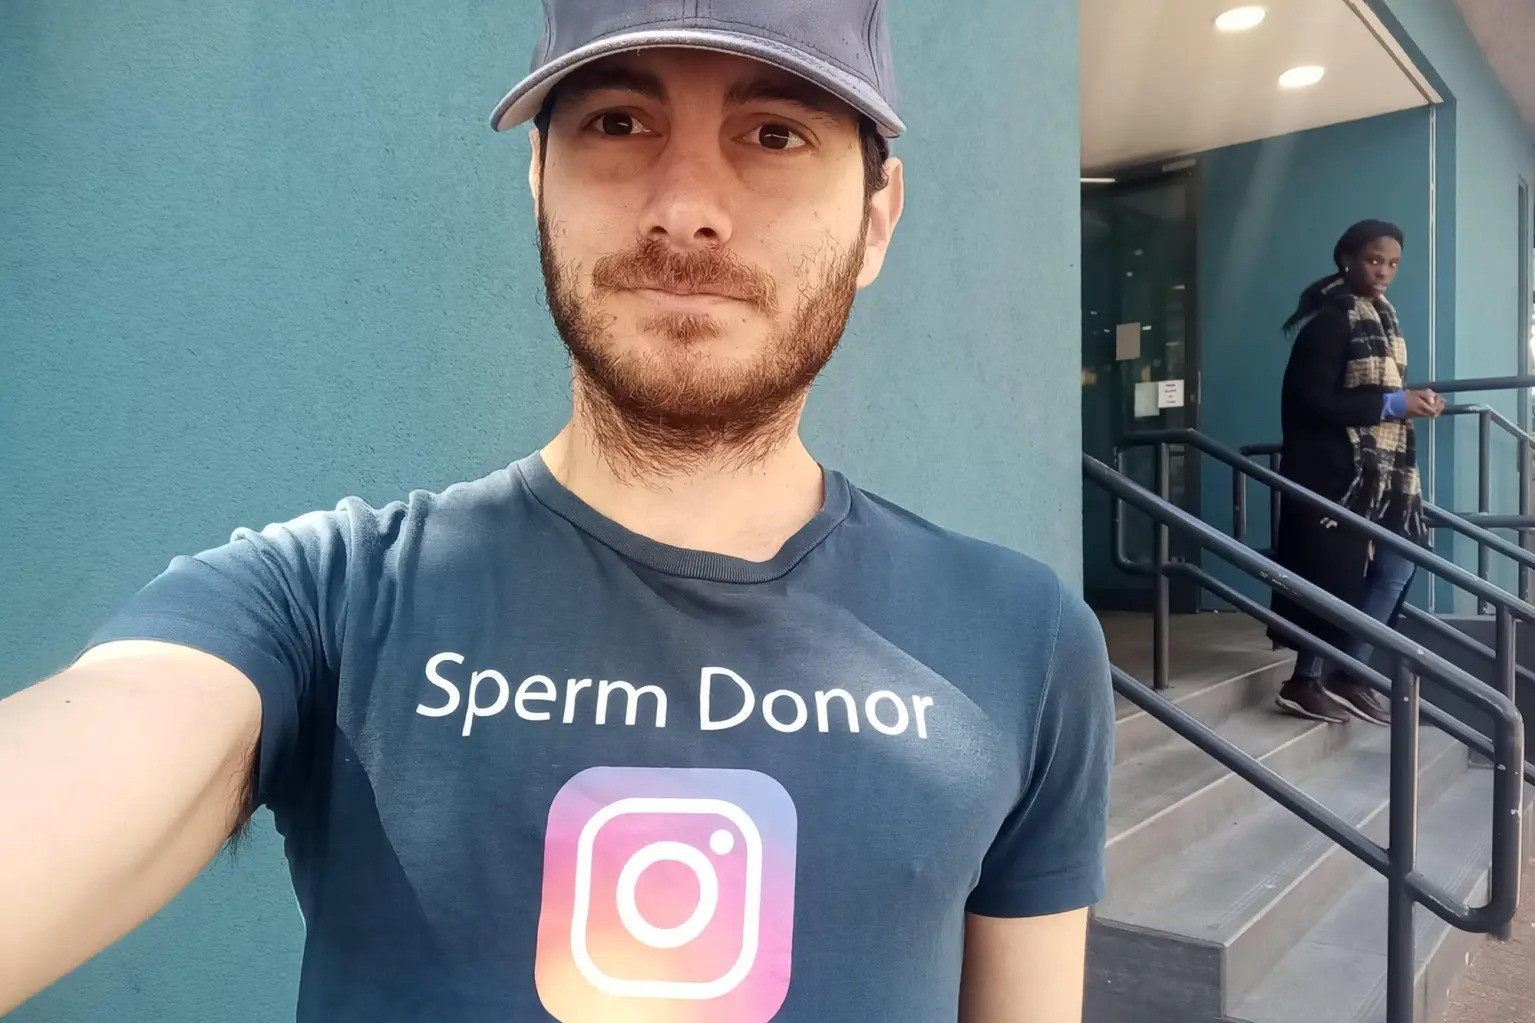 The suffering of a 30-year-old man who donates sperm around the world - 1